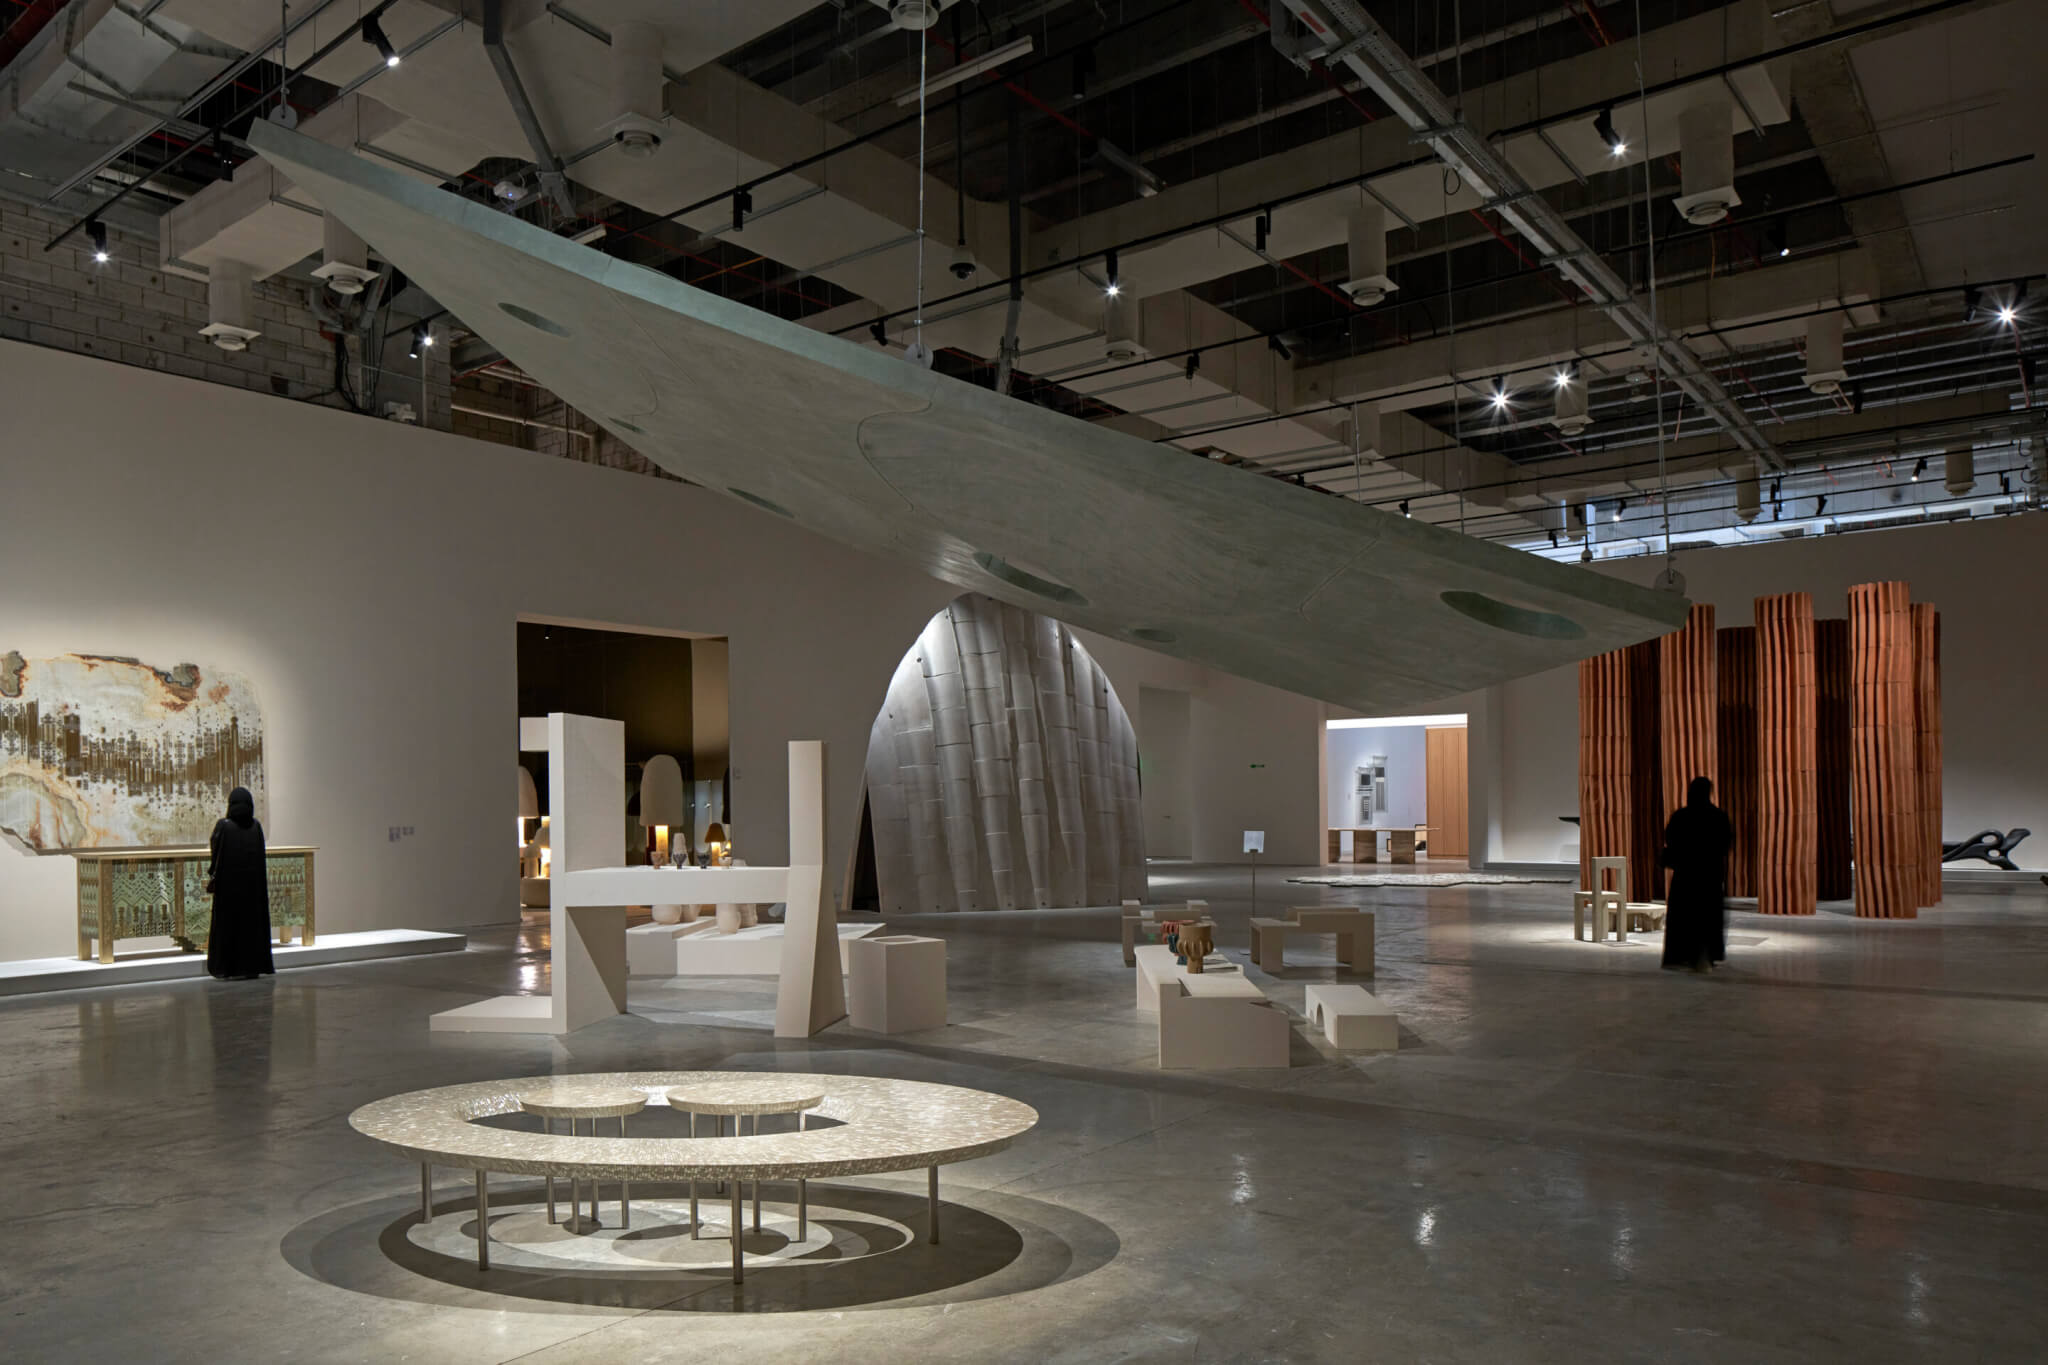 installation view of Arab Design Now showing sculptures and hanging art works